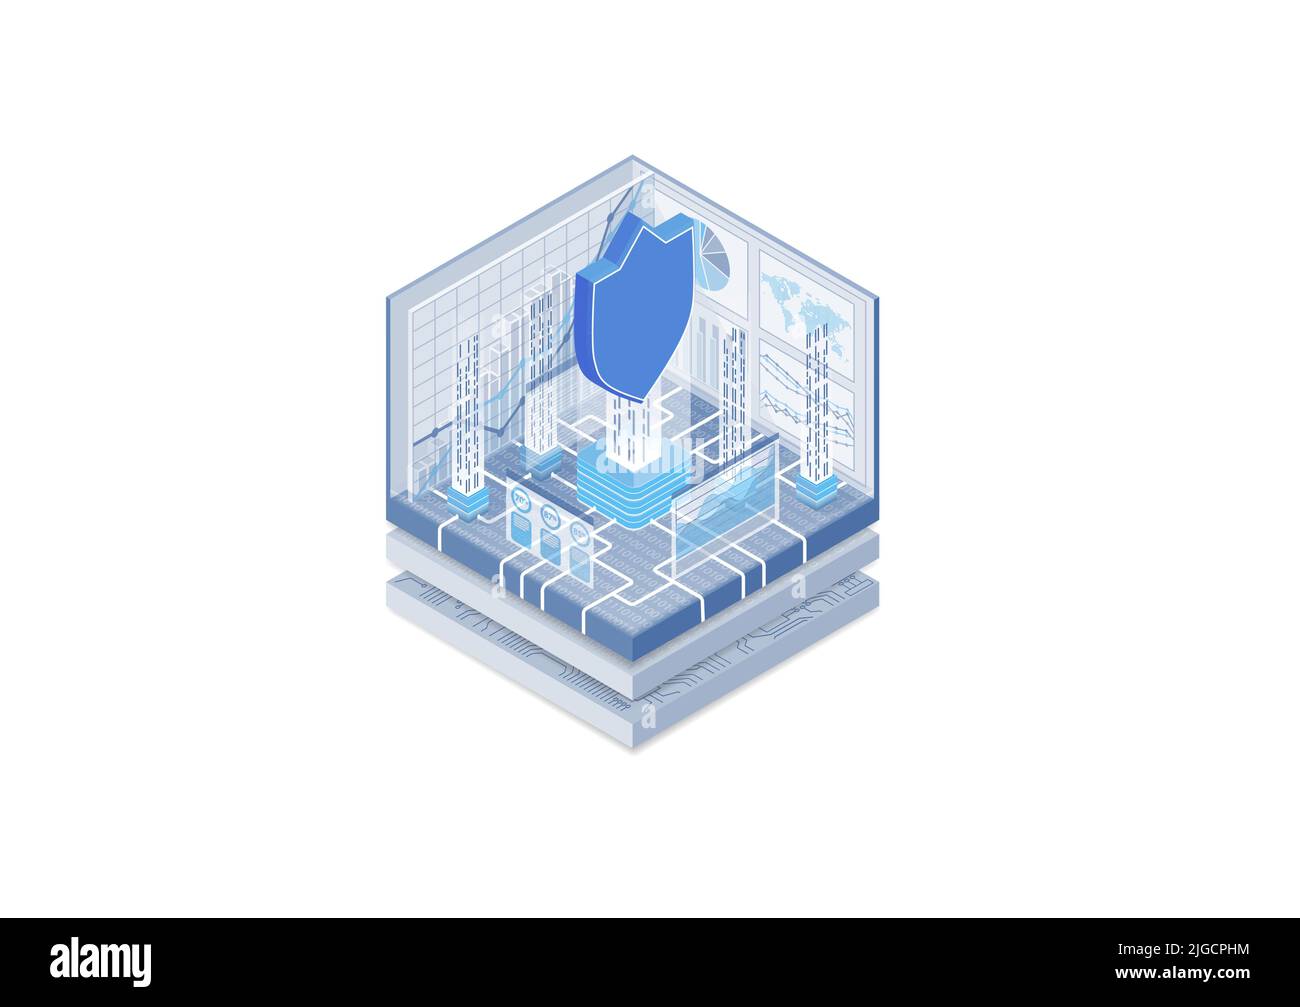 IT Security concept. Vector illustration of an isometric cube. A symbol of a shield protecting data stream within an organisation. Analysis of data vi Stock Vector